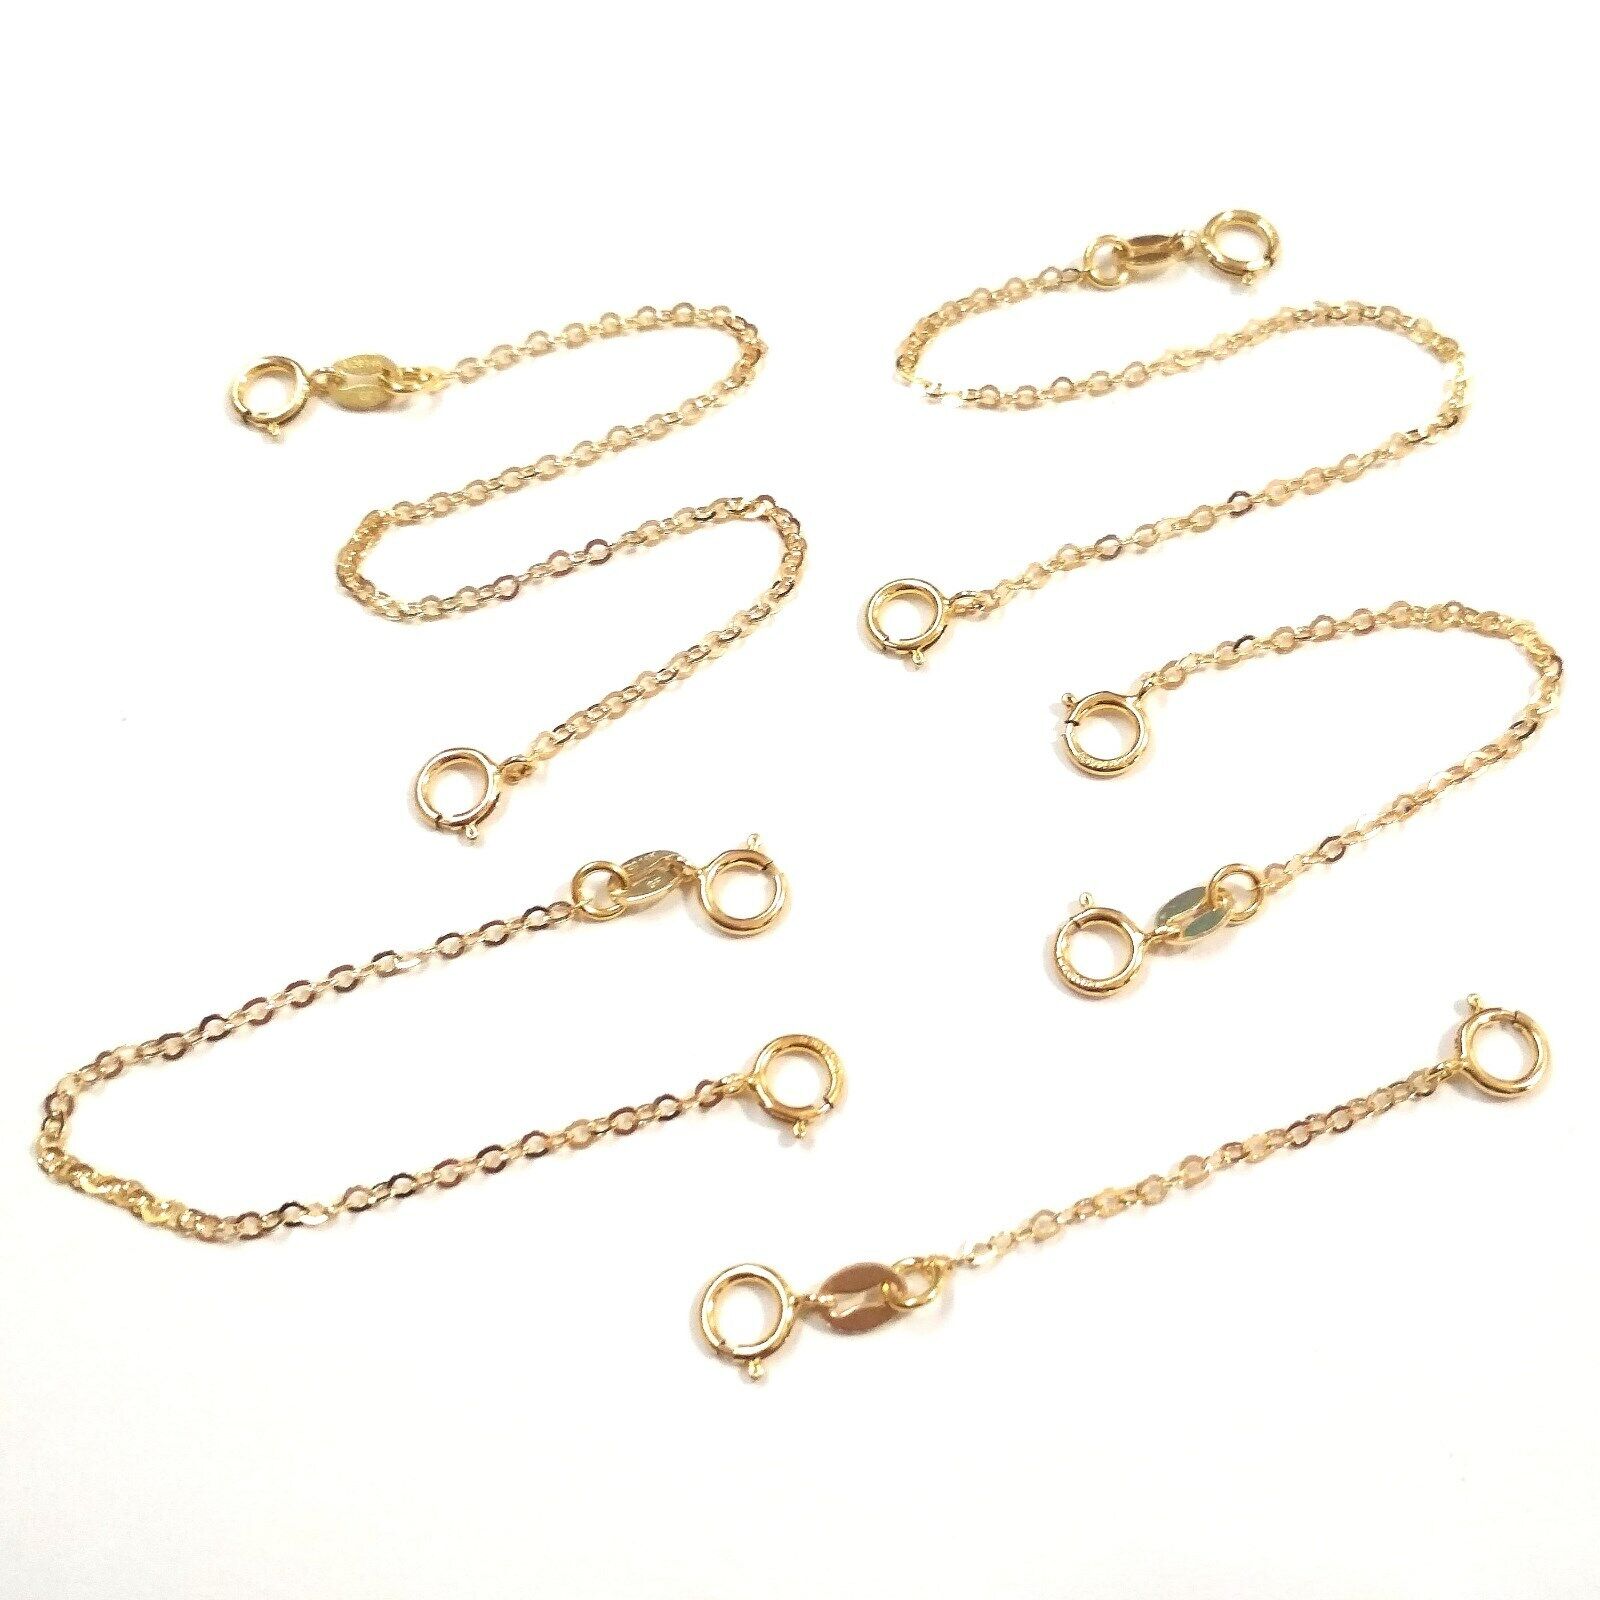 5 pcs 14kt GOLD FILLED 1.5x2mm Flat Cable Chain EXTENDERS with Two Spring Clasps BalliSilver